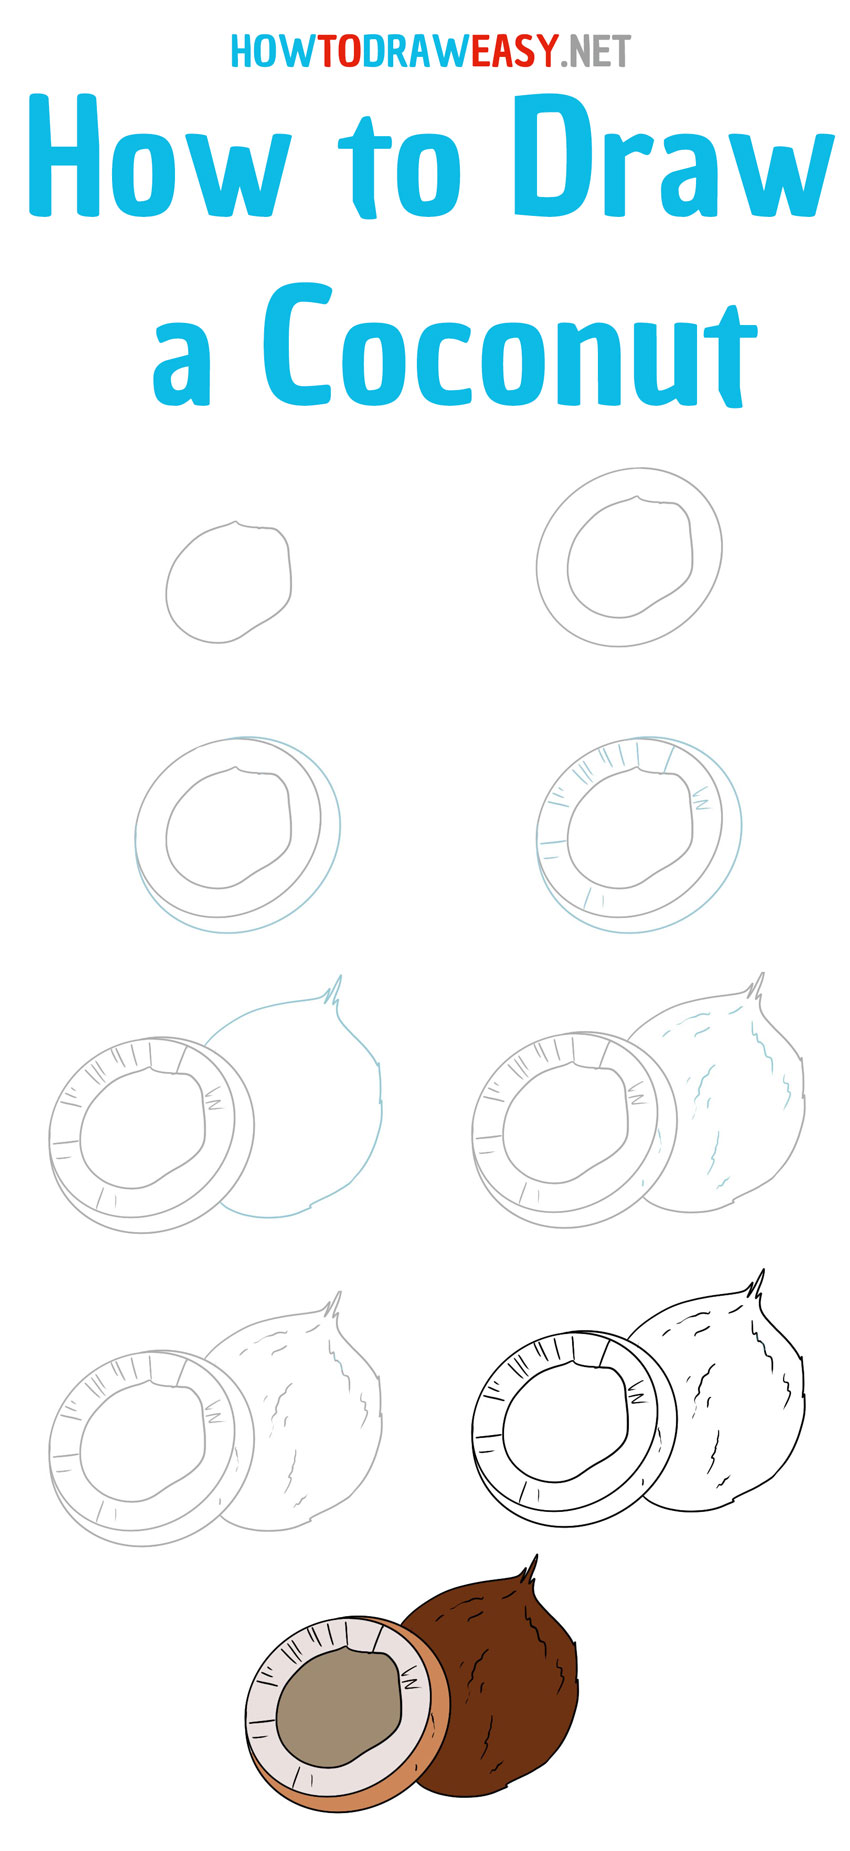 how-to-draw-a-coconut-step-by-step